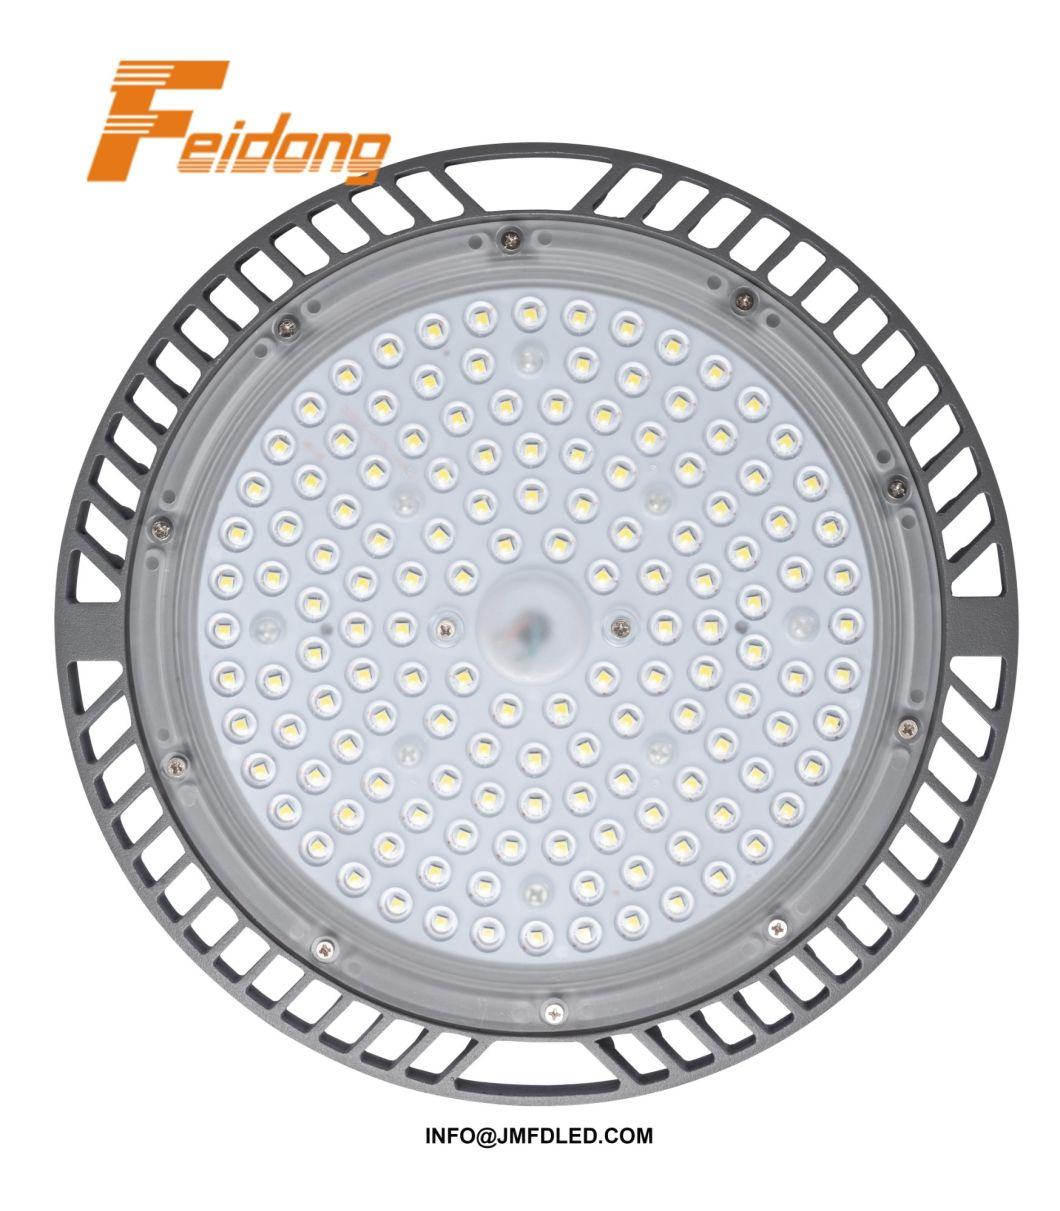 UFO LED High Bay Light for Indoor Industrial Factory Warehouse Lighting